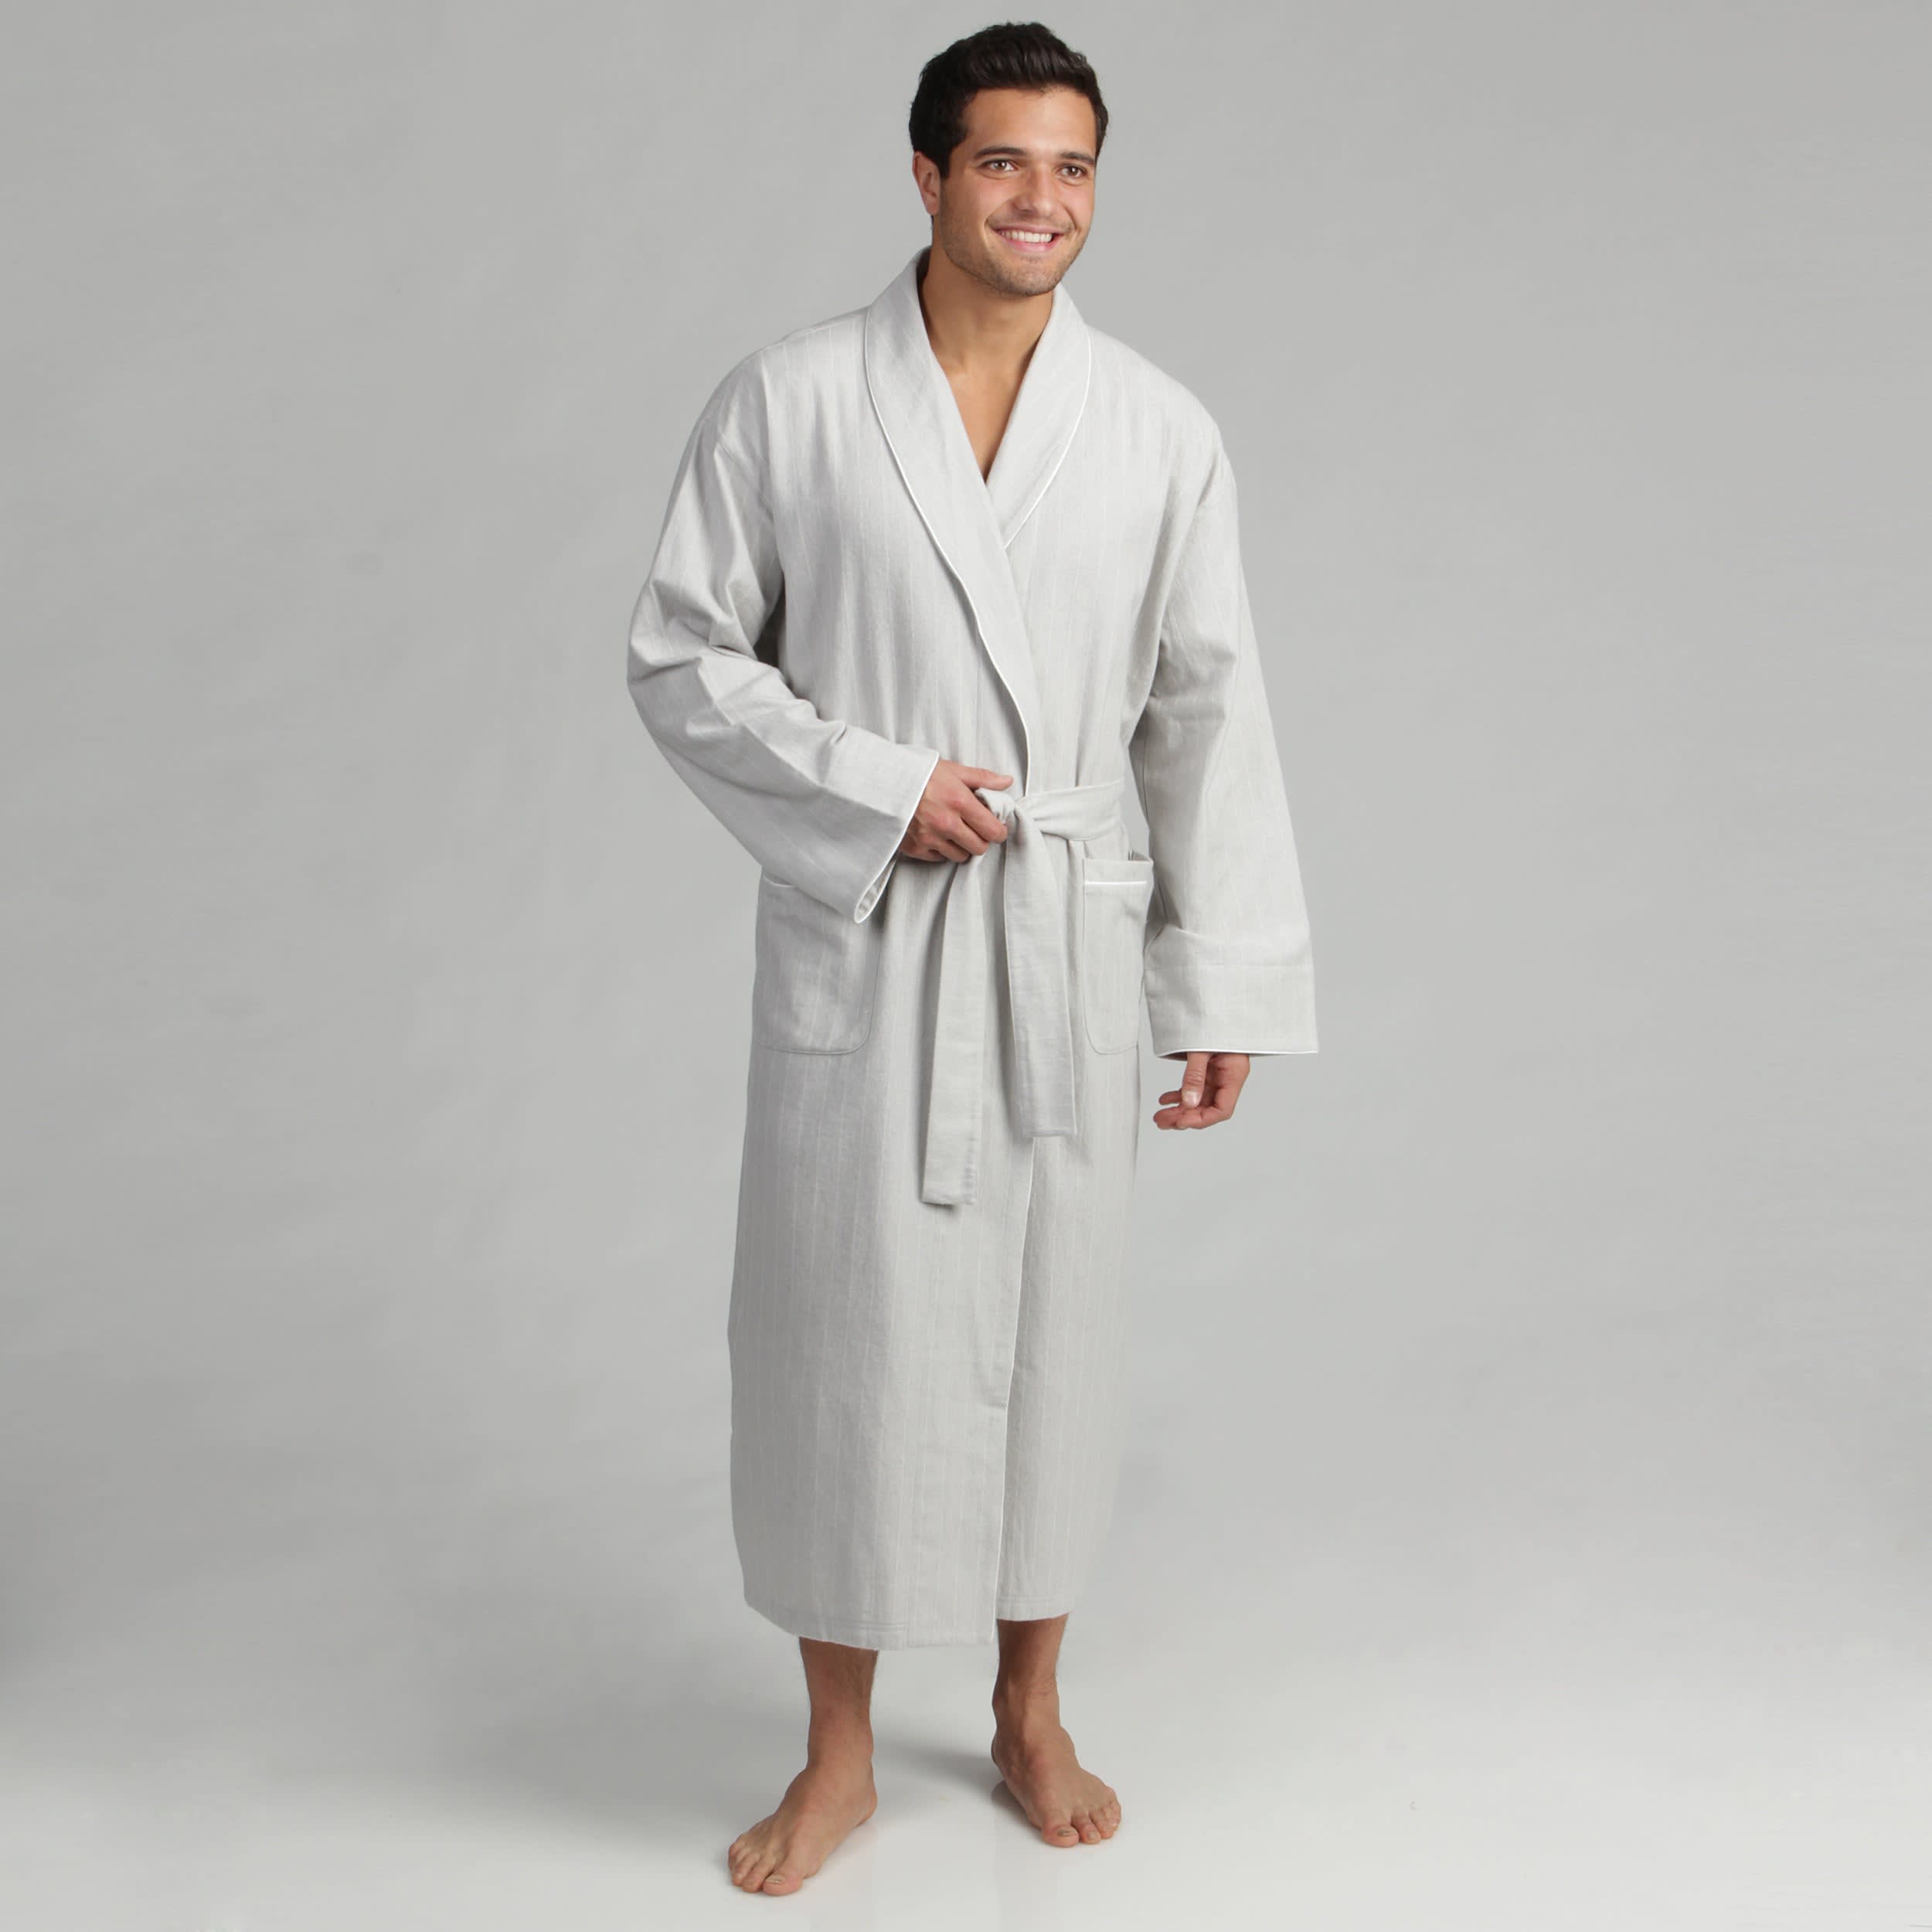 Wulfing (dormisette) 7oz flannel robes – Muffet and Louisa